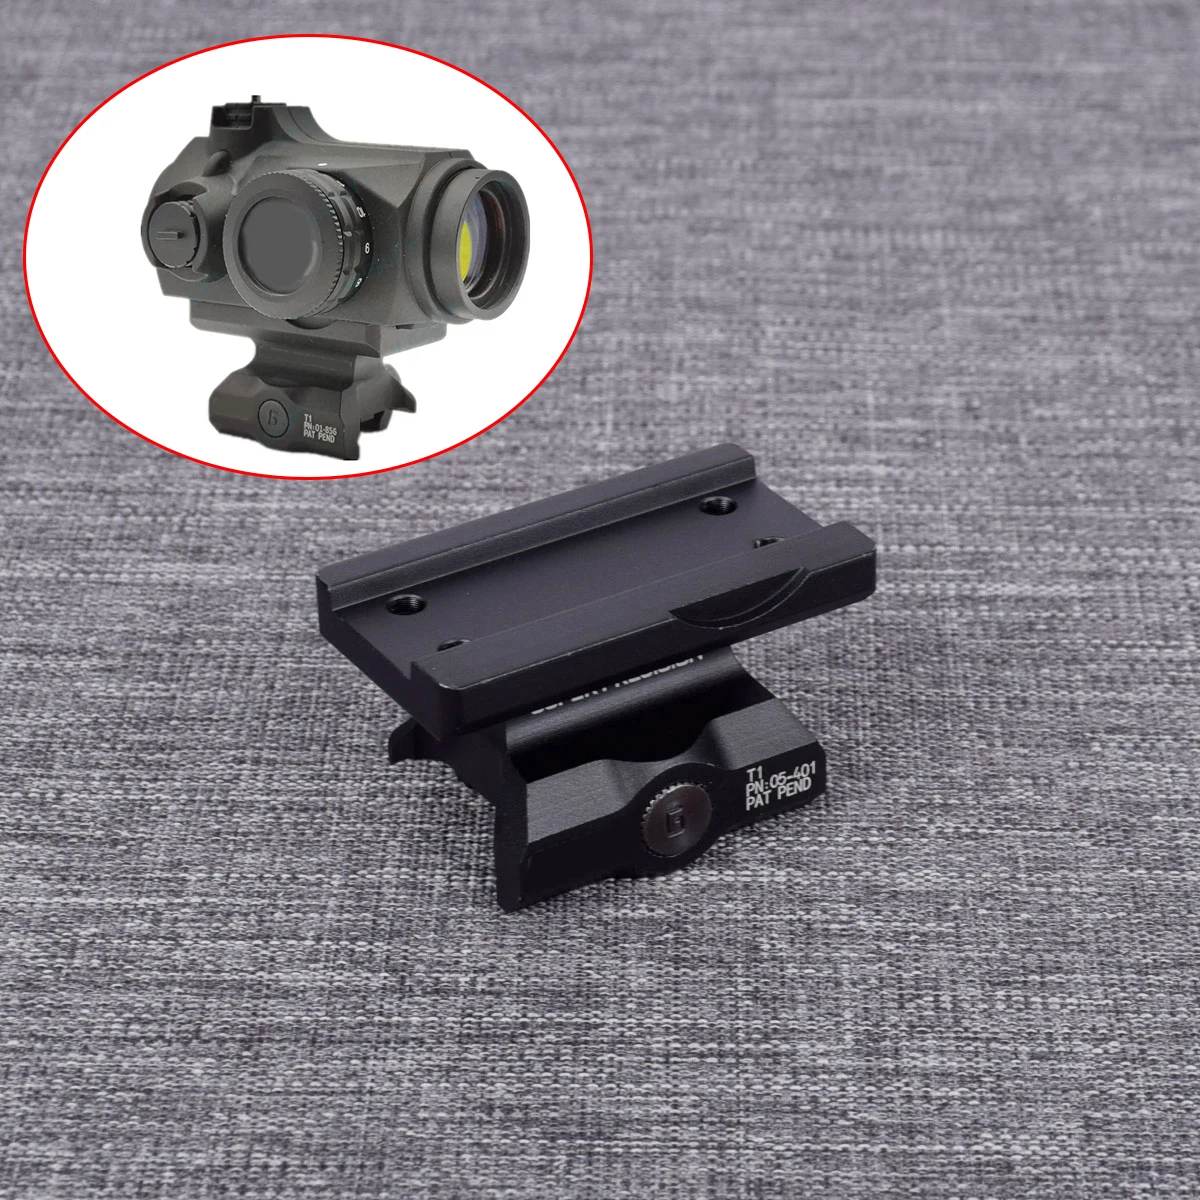 

Tactical GE Series Scope Riser Mount For Hunting Airsoft Rifle AR15 M4 Scope T1 T2 Red Dot Sight Fit 20mm Picatinny Rail